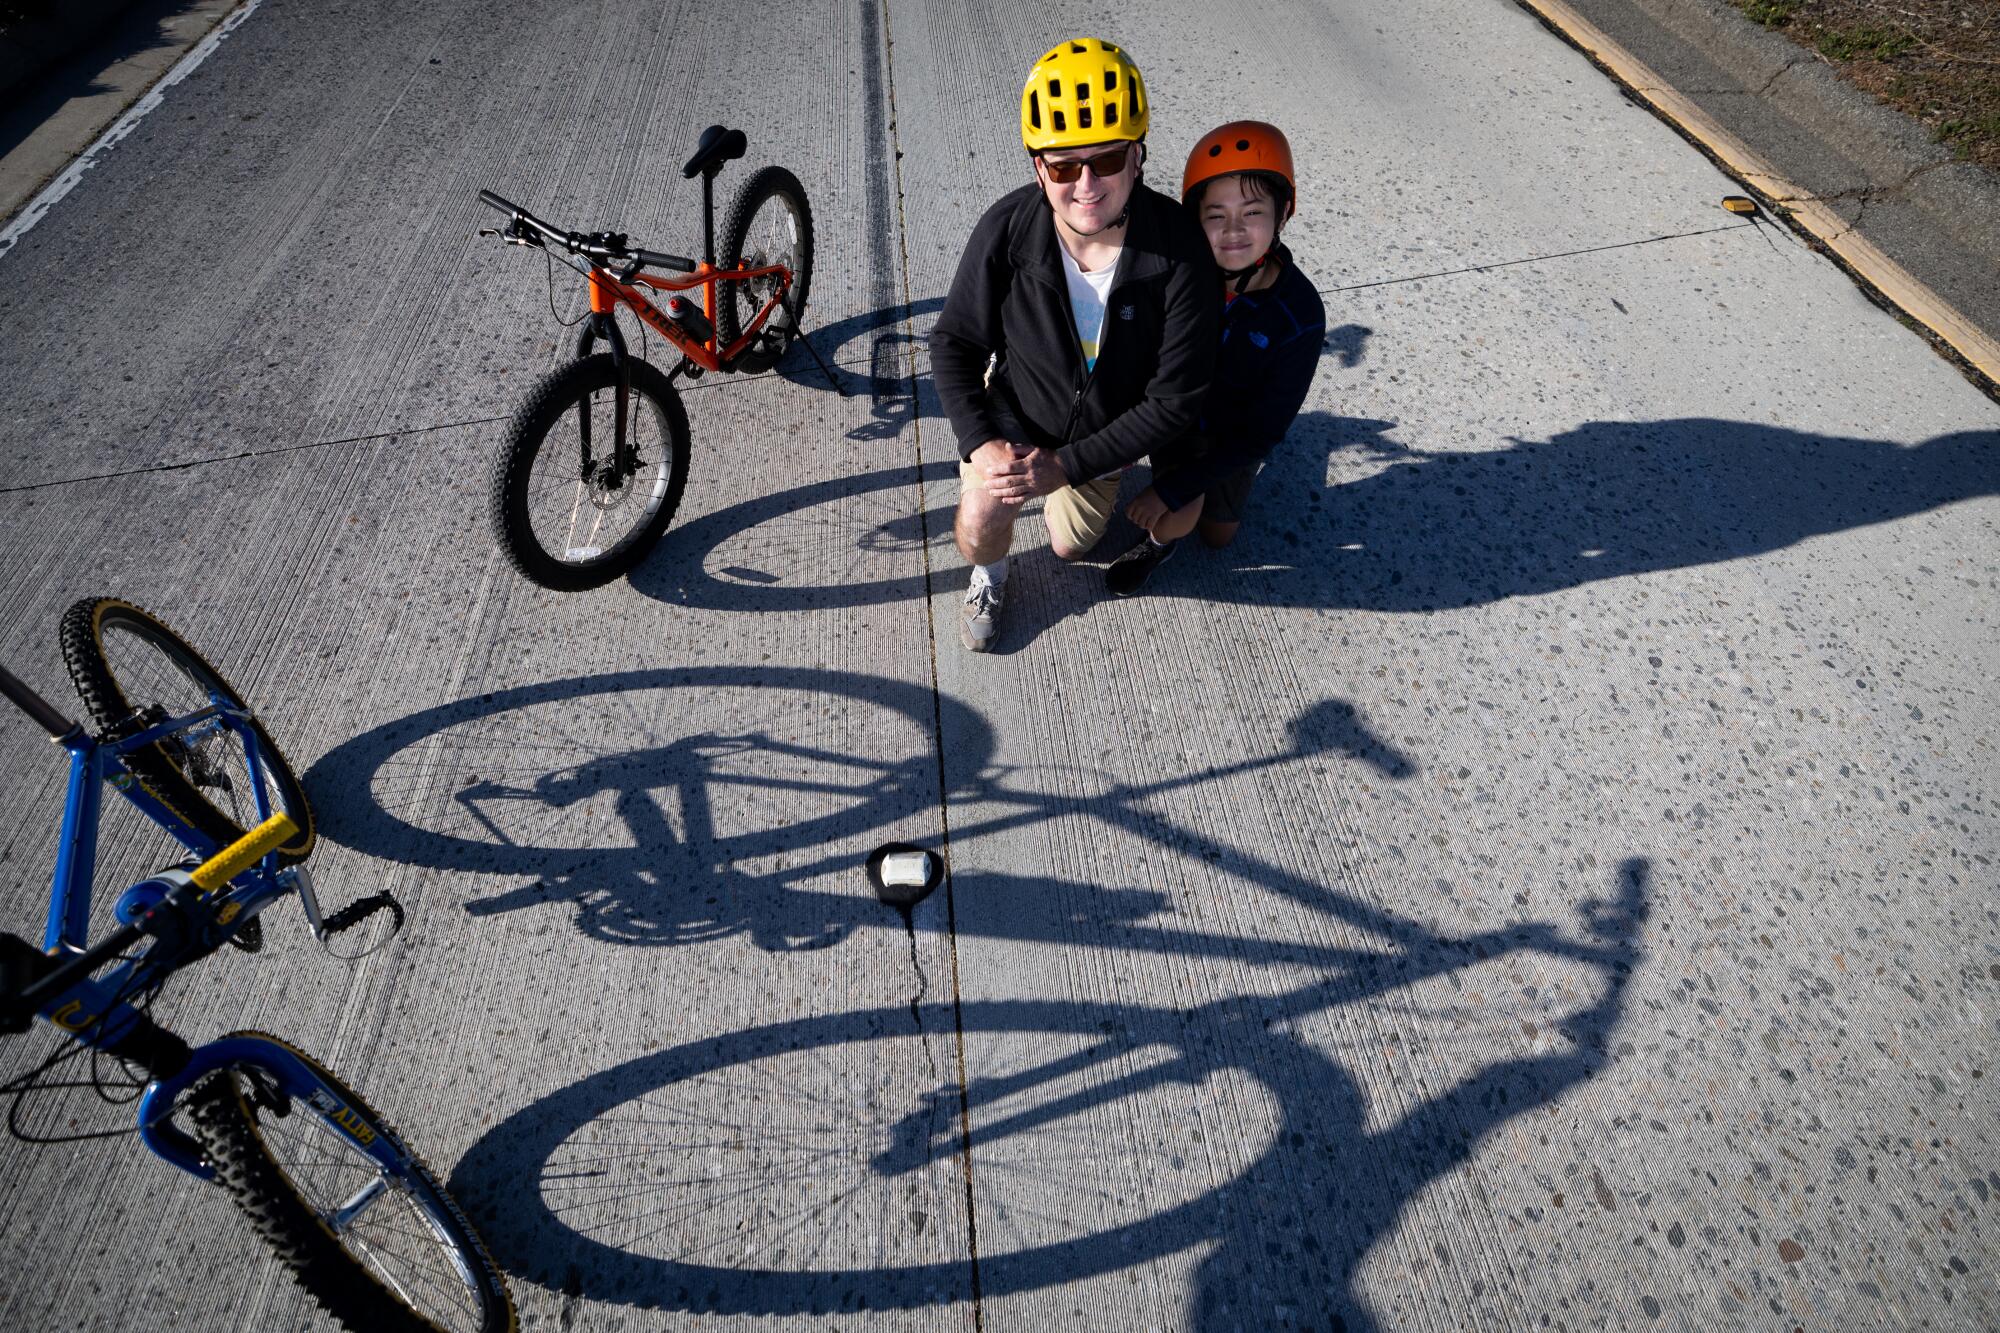 John Engelke and son Liam, 12, of Silver Lake pose on the 110 Freeway